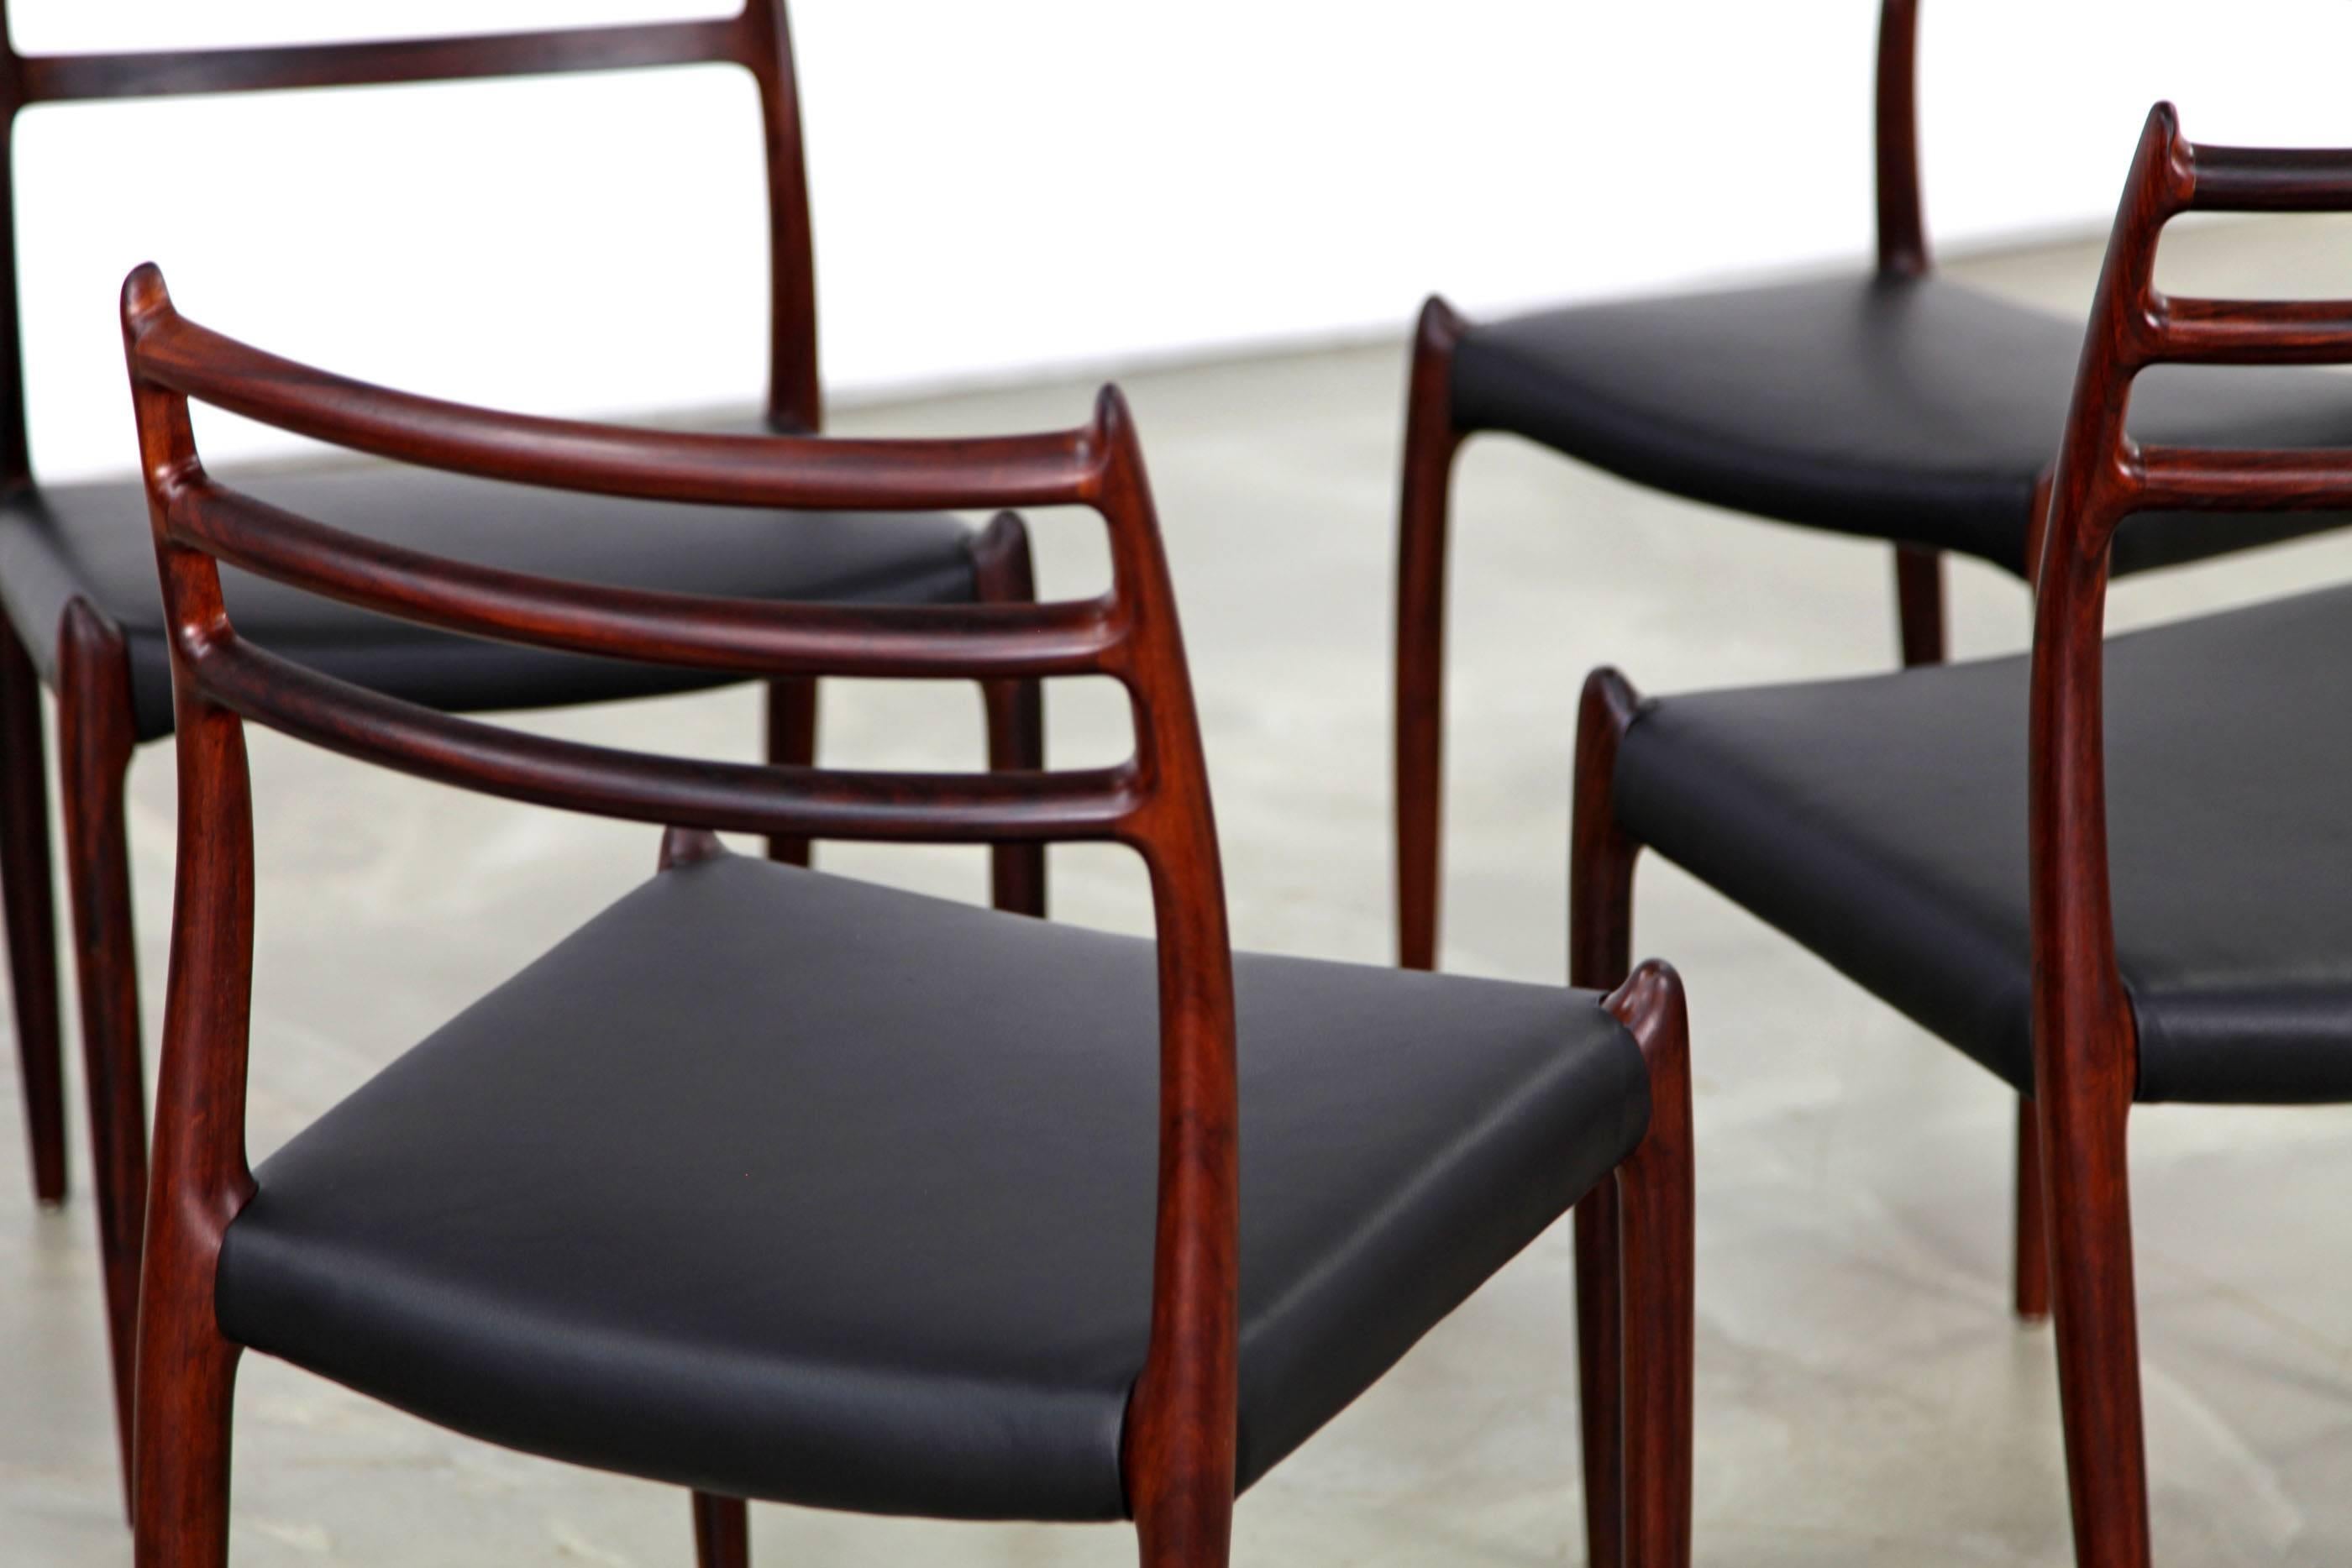 Set of four rosewood chairs from the 1960s, designed by Niels O. Møller. The chairs have been reupholstered with black aniline leather.